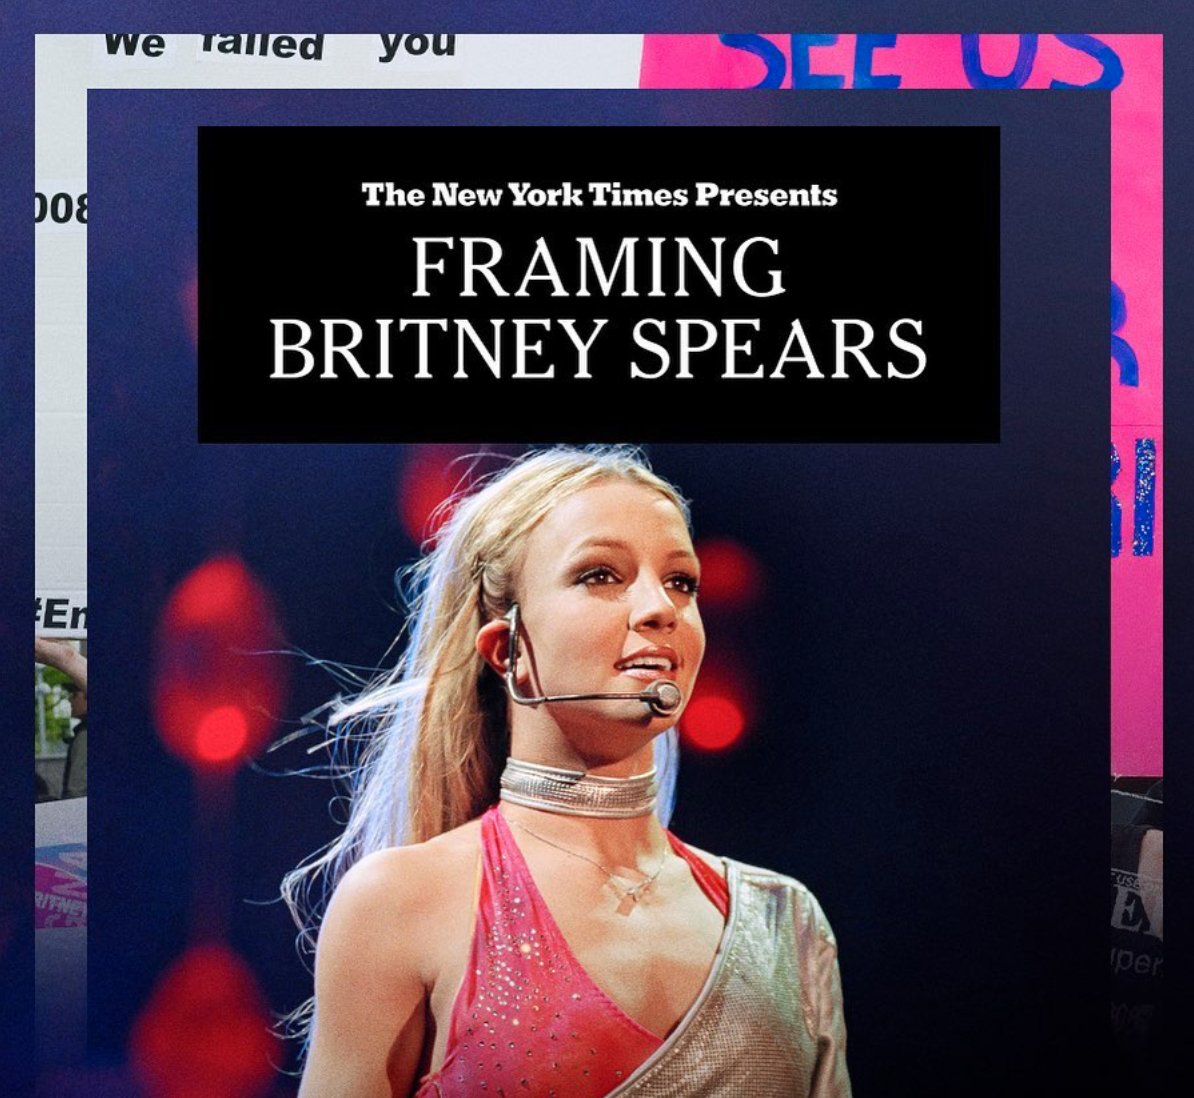 how to watch FRAMING BRITINY SPEARS IN CANADA